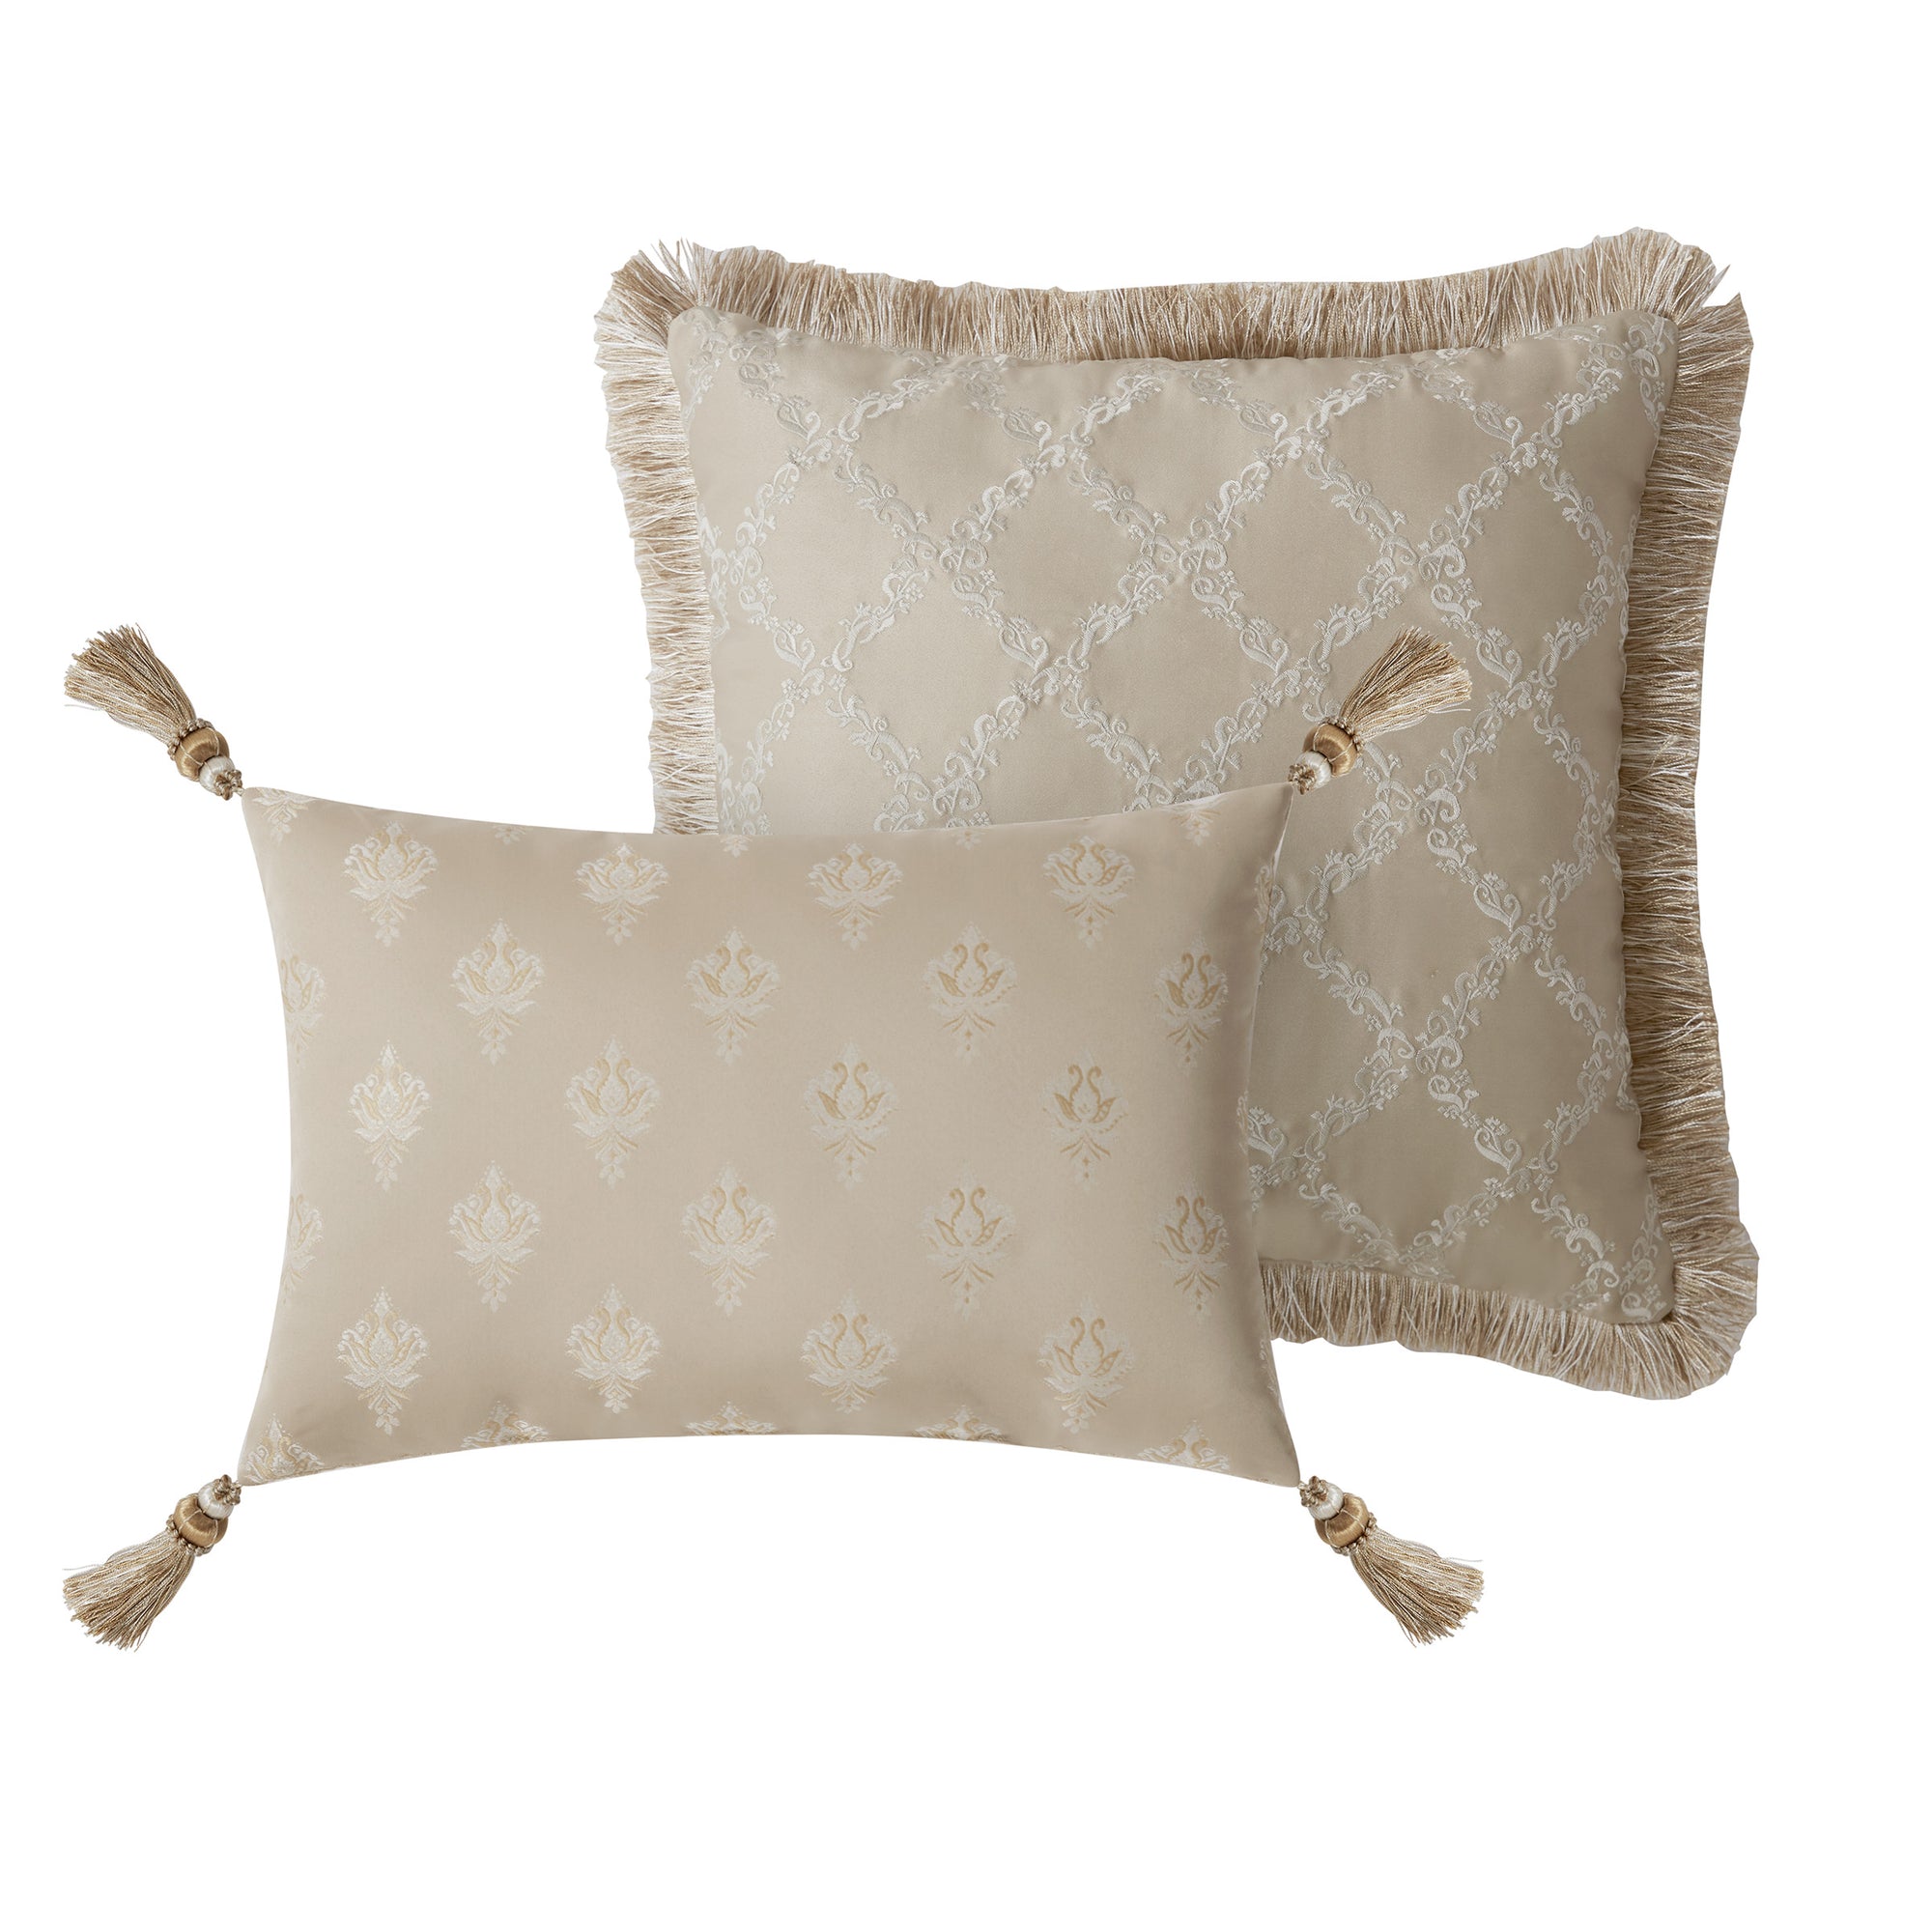 Waterford Annalise Decorative Pillows Set of 2 - Gold